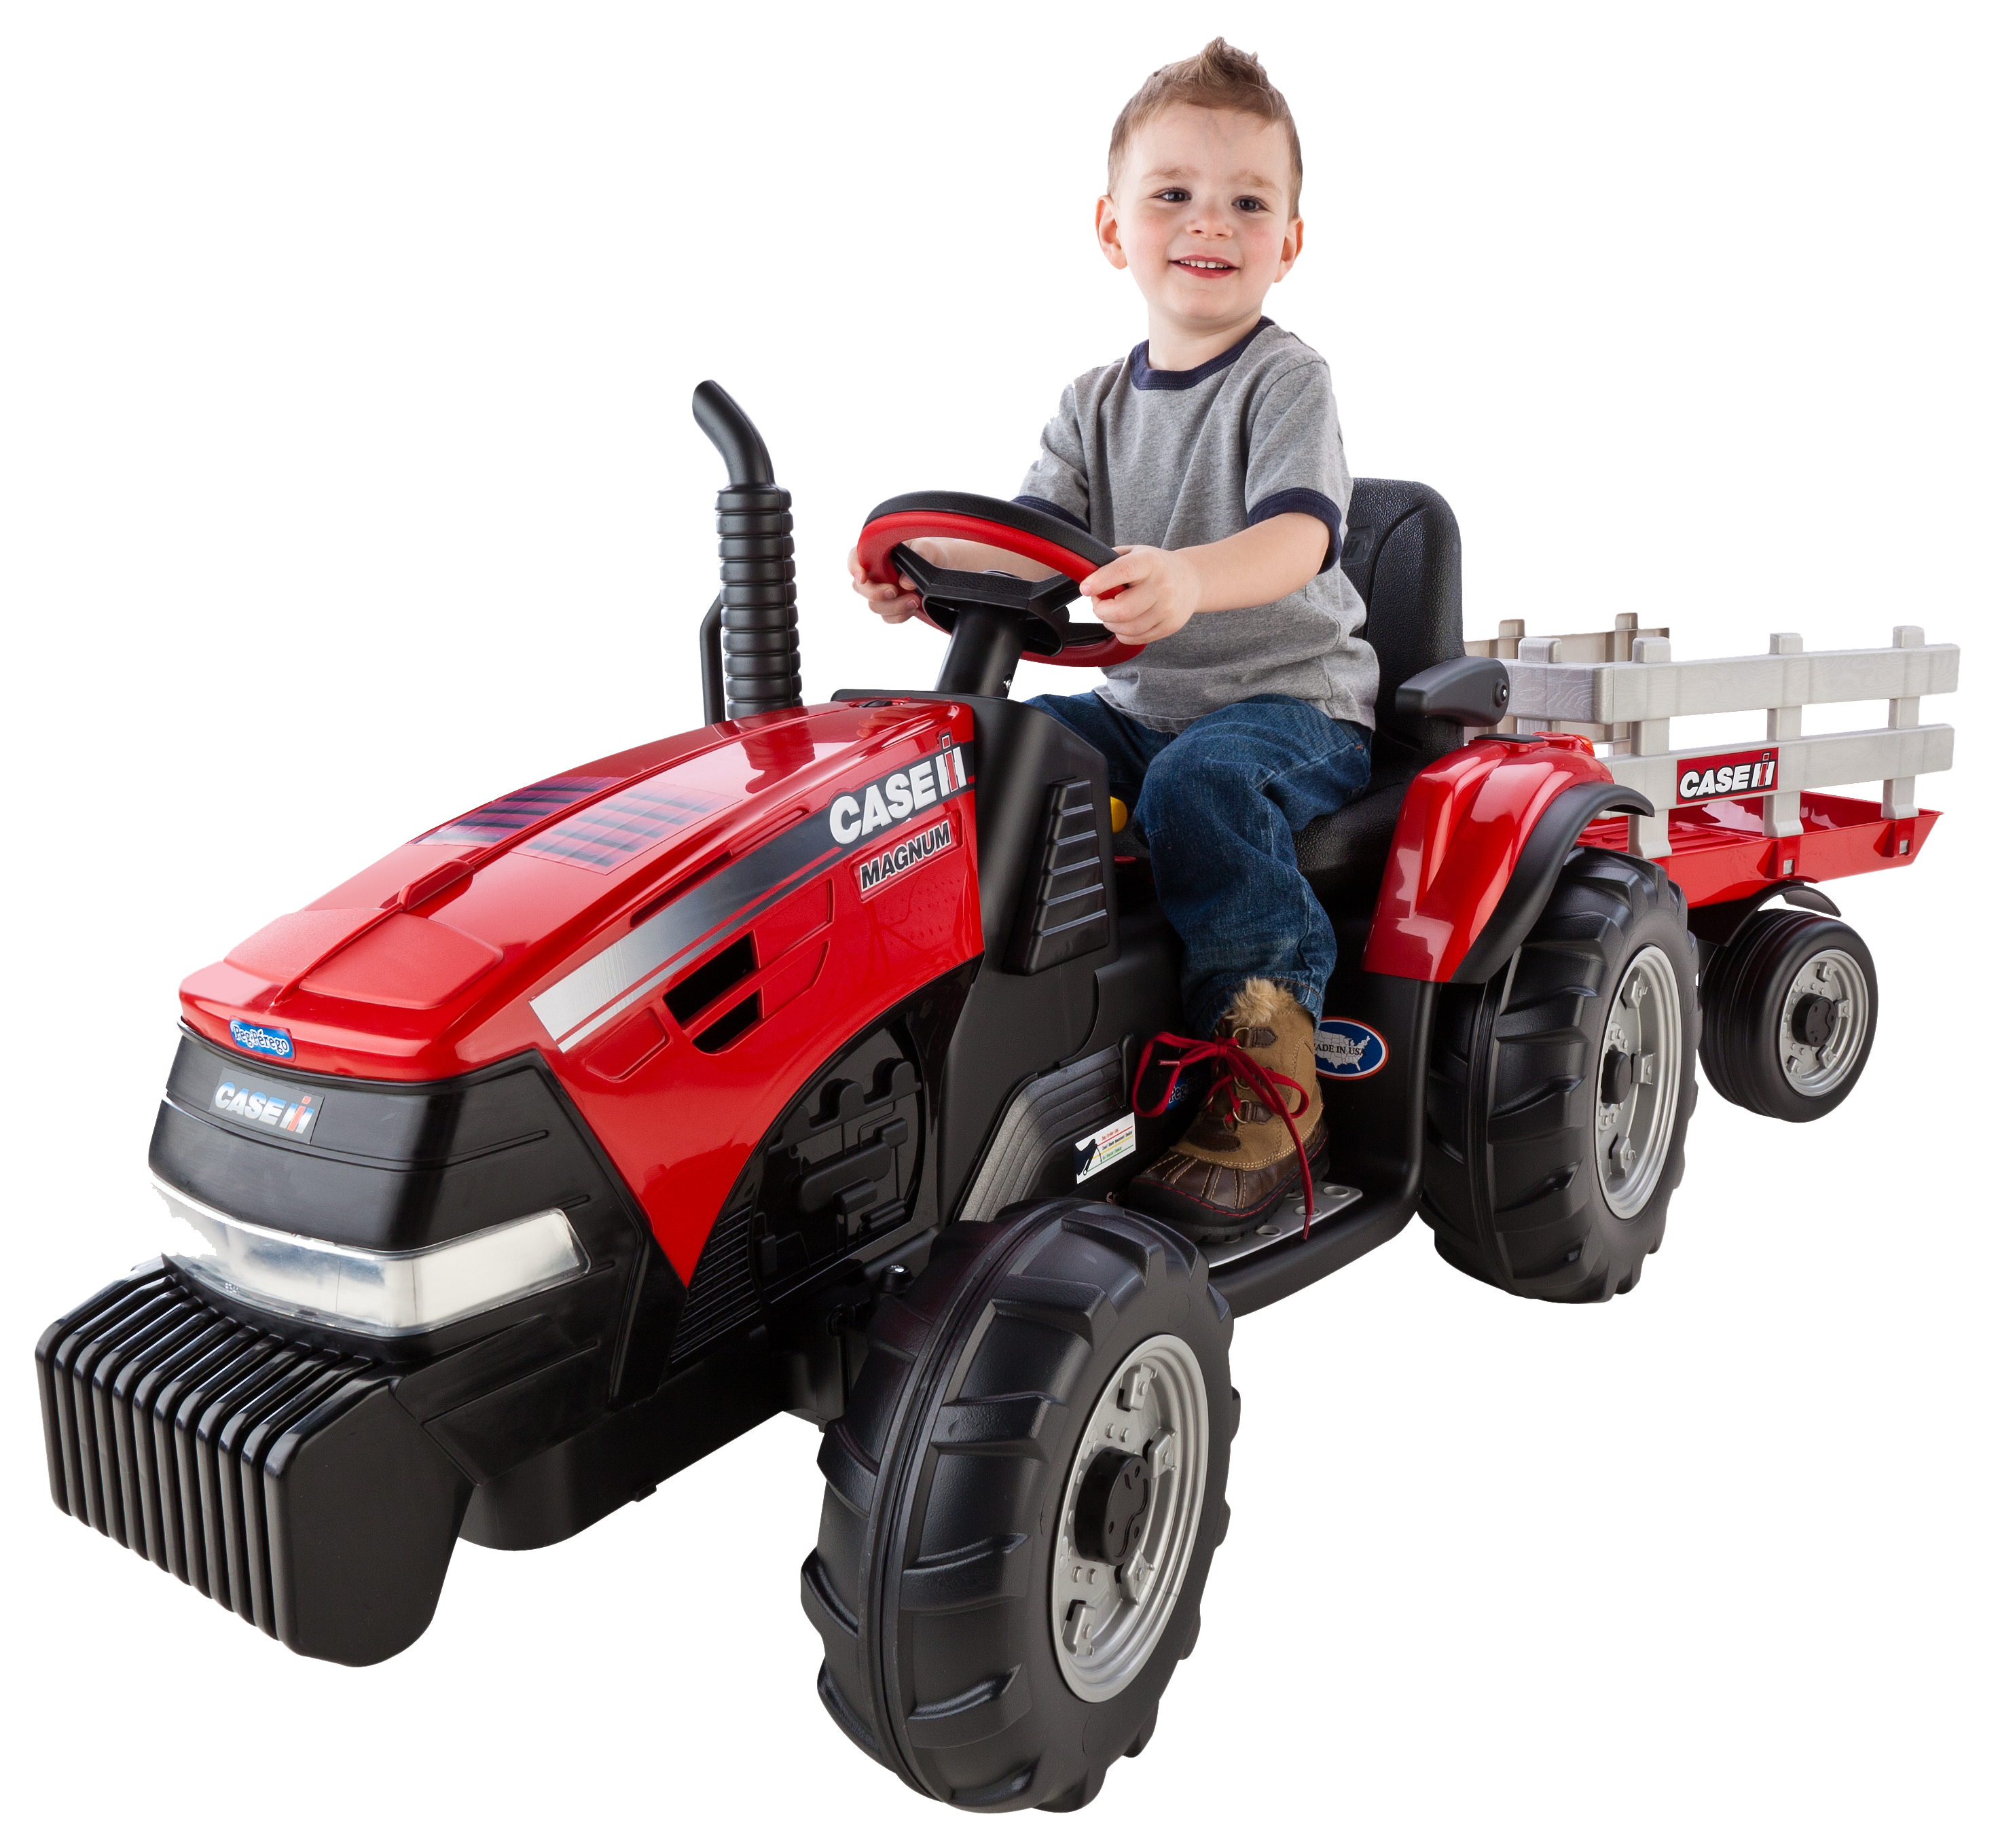 Peg-Perego CASE IH Magnum Tractor/Trailer Ride-On Toy for Kids - Red -  Peg Perego